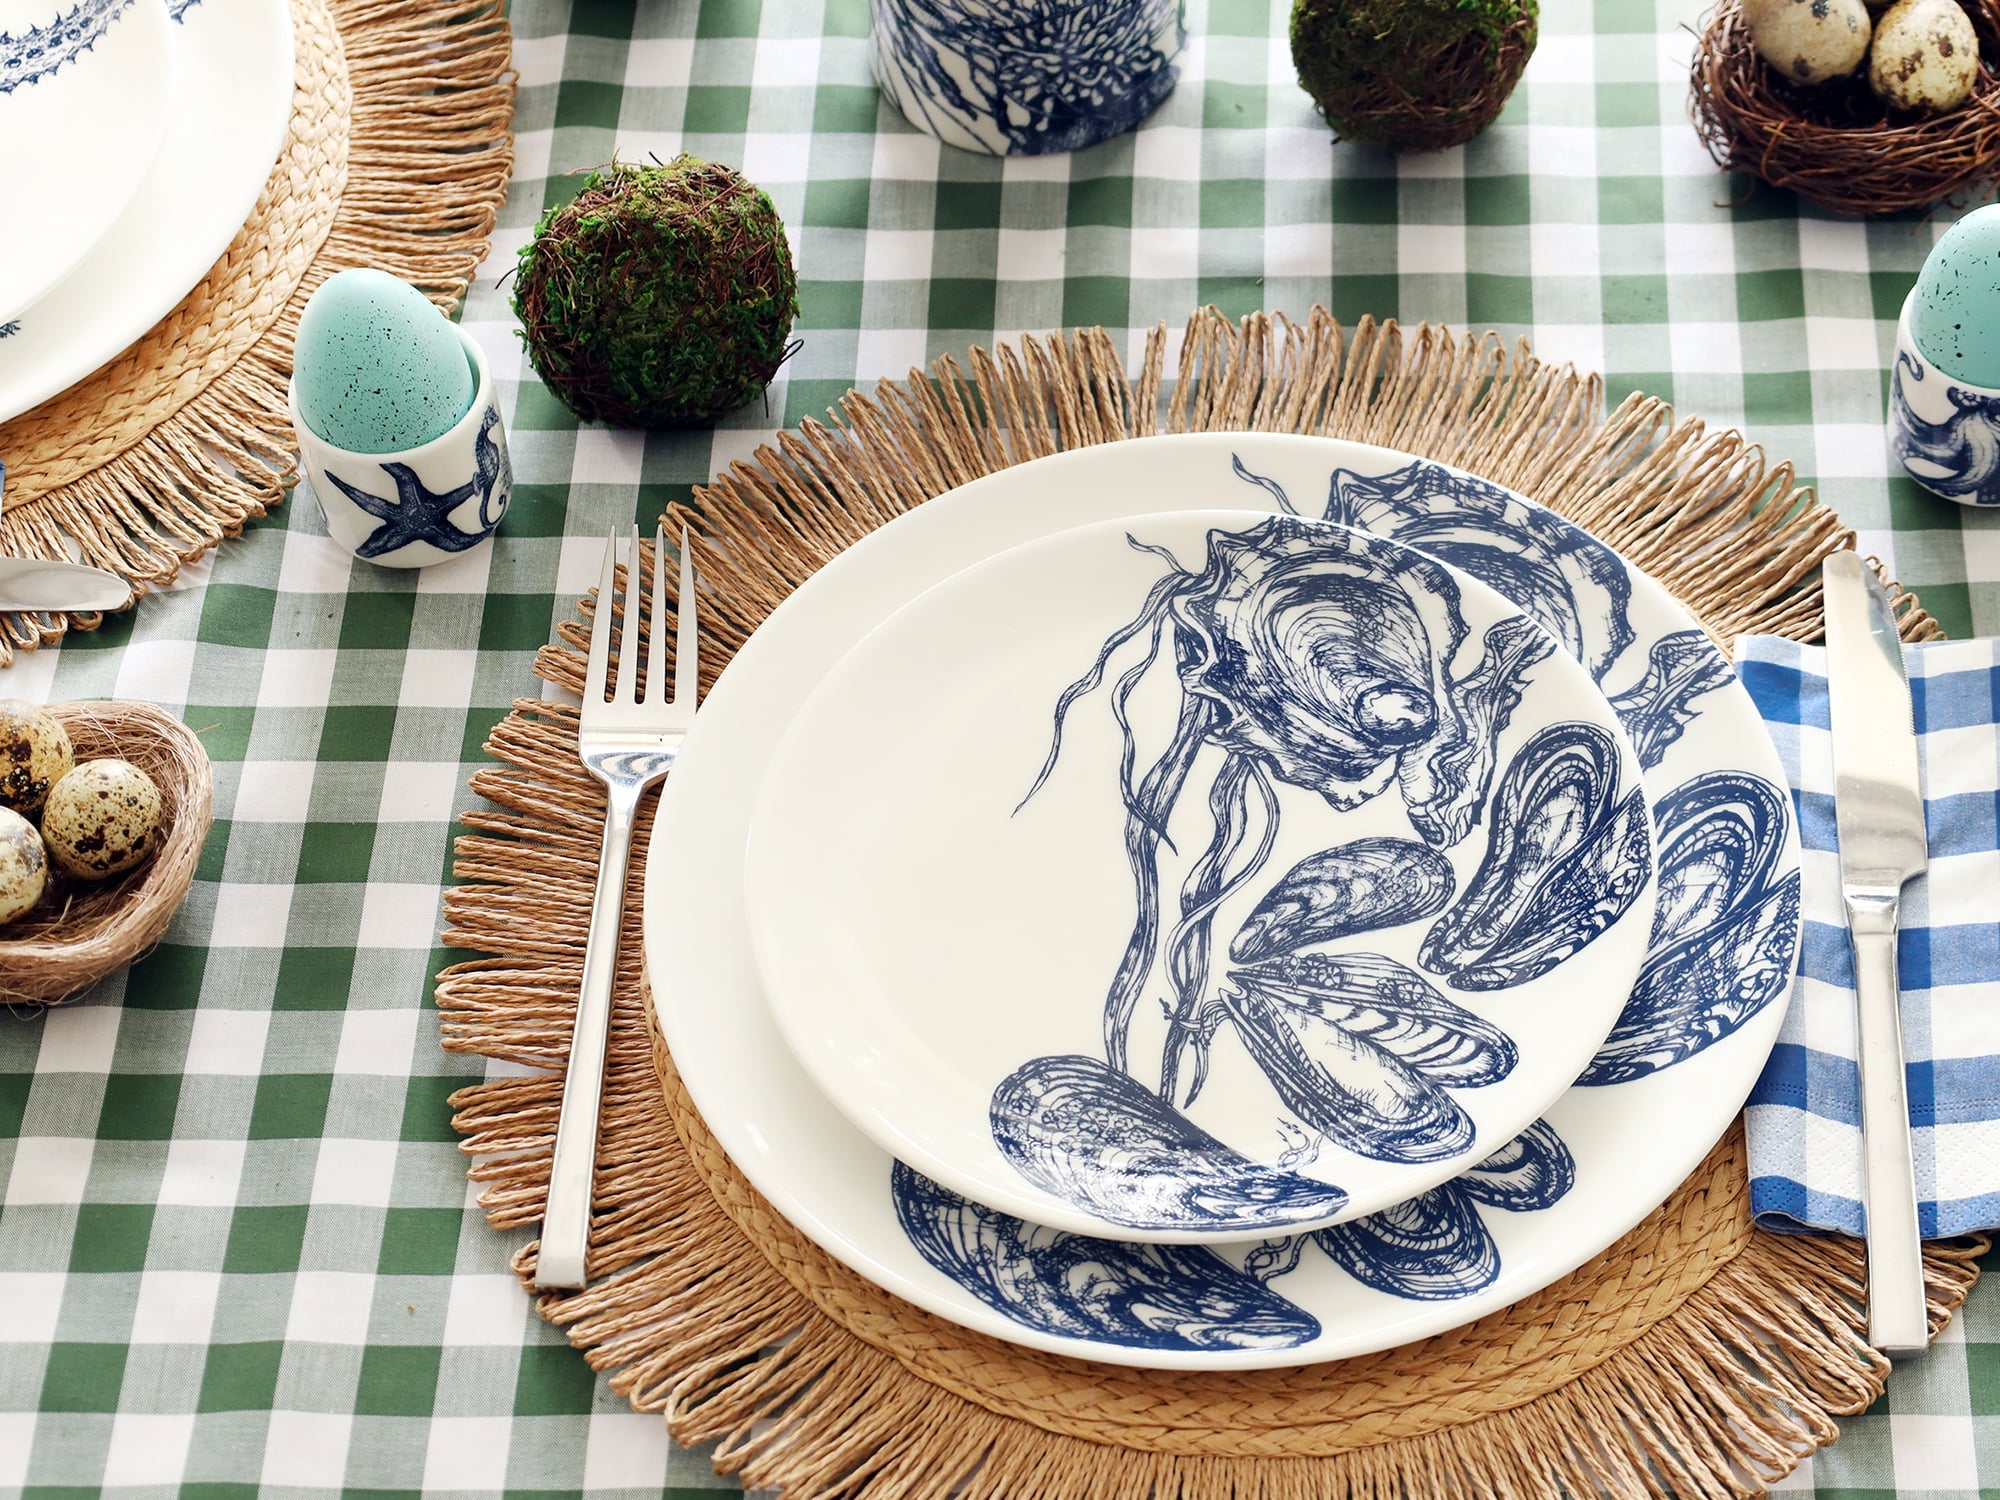 White bone china dinner plate with side plate sitting on top. Both plates have a navy blue illustration of mussels & oysters on. They are set as a place setting on a raffia placemat with blue gingham napkin and green gingham tablecloth. the table is set for Easter with eggs in egg cups and moss balls.